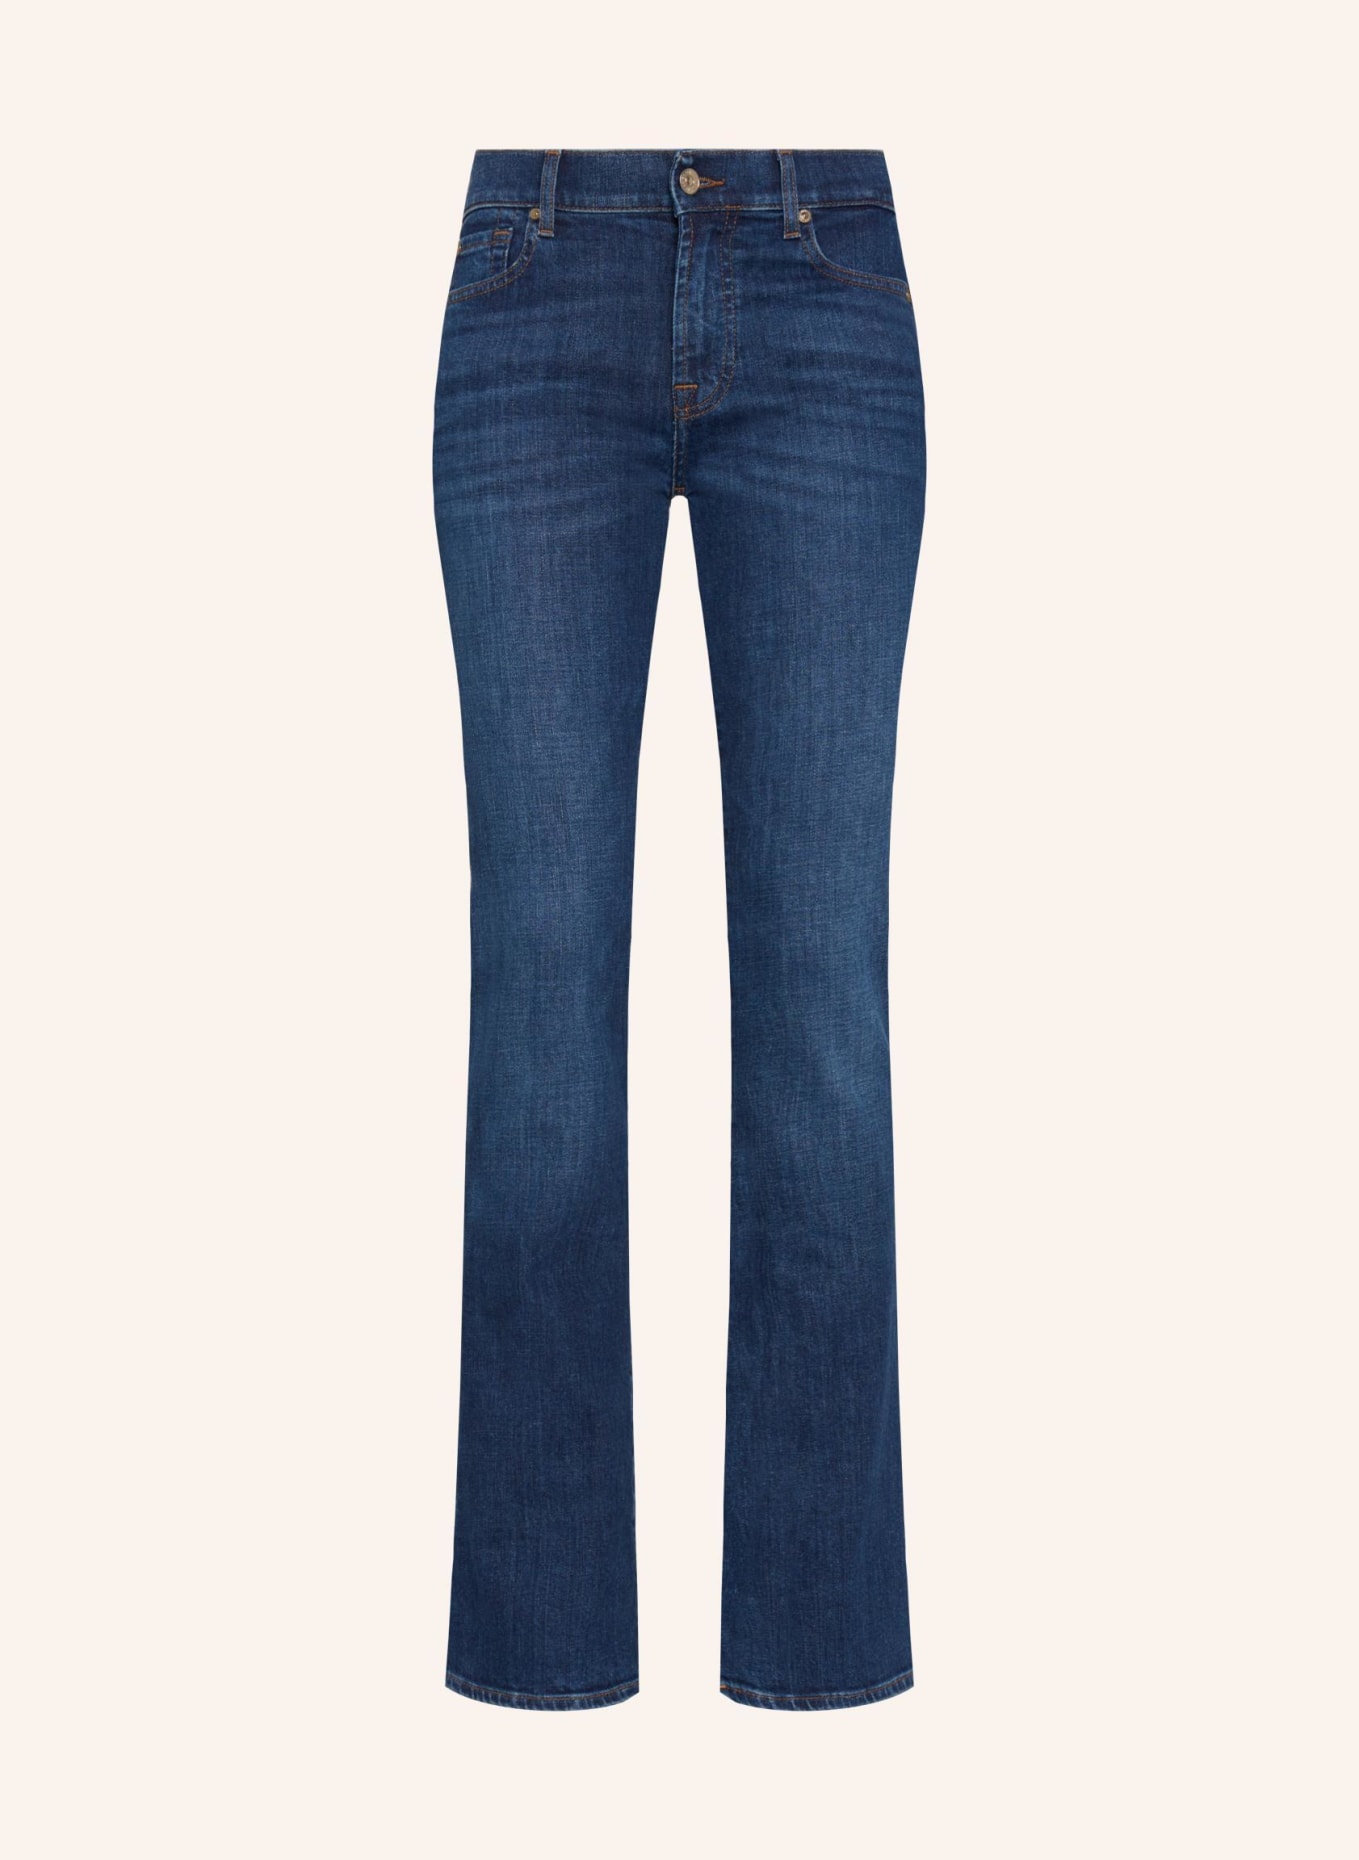 7 for all mankind Jeans BOOTCUT Bootcut Fit, Farbe: BLAU (Bild 1)